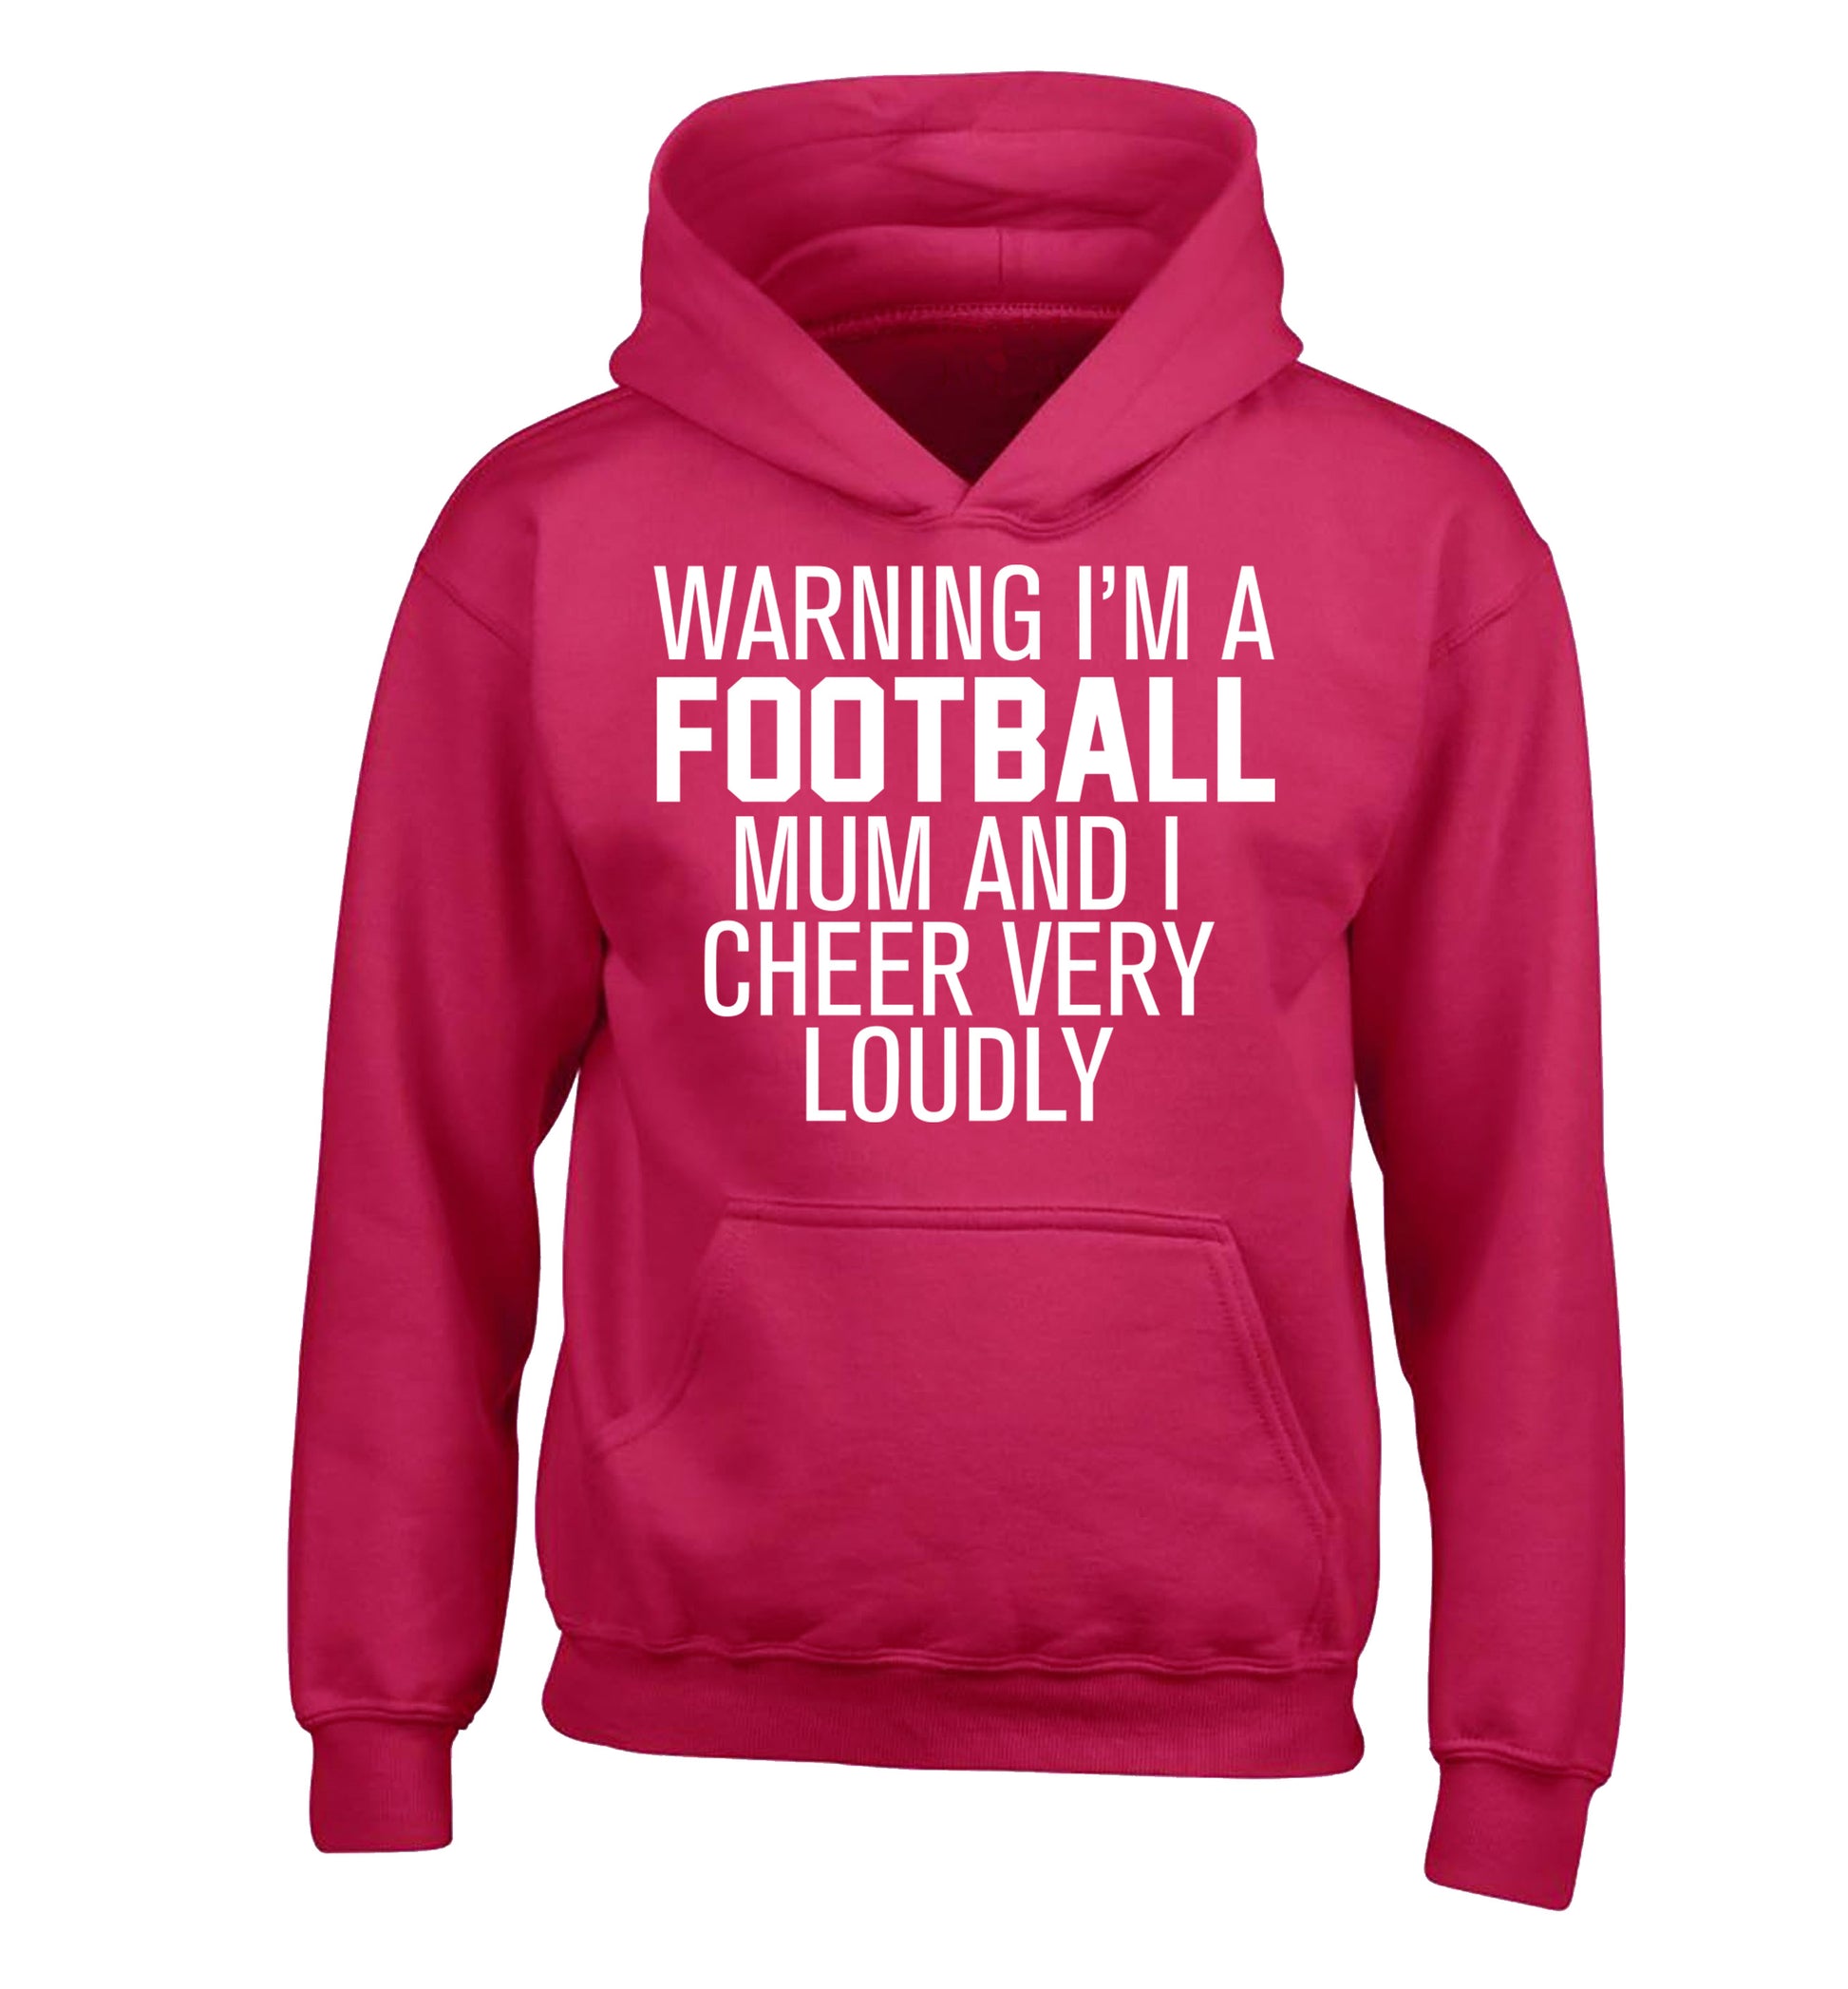 Warning I'm a football mum and I cheer very loudly children's pink hoodie 12-14 Years